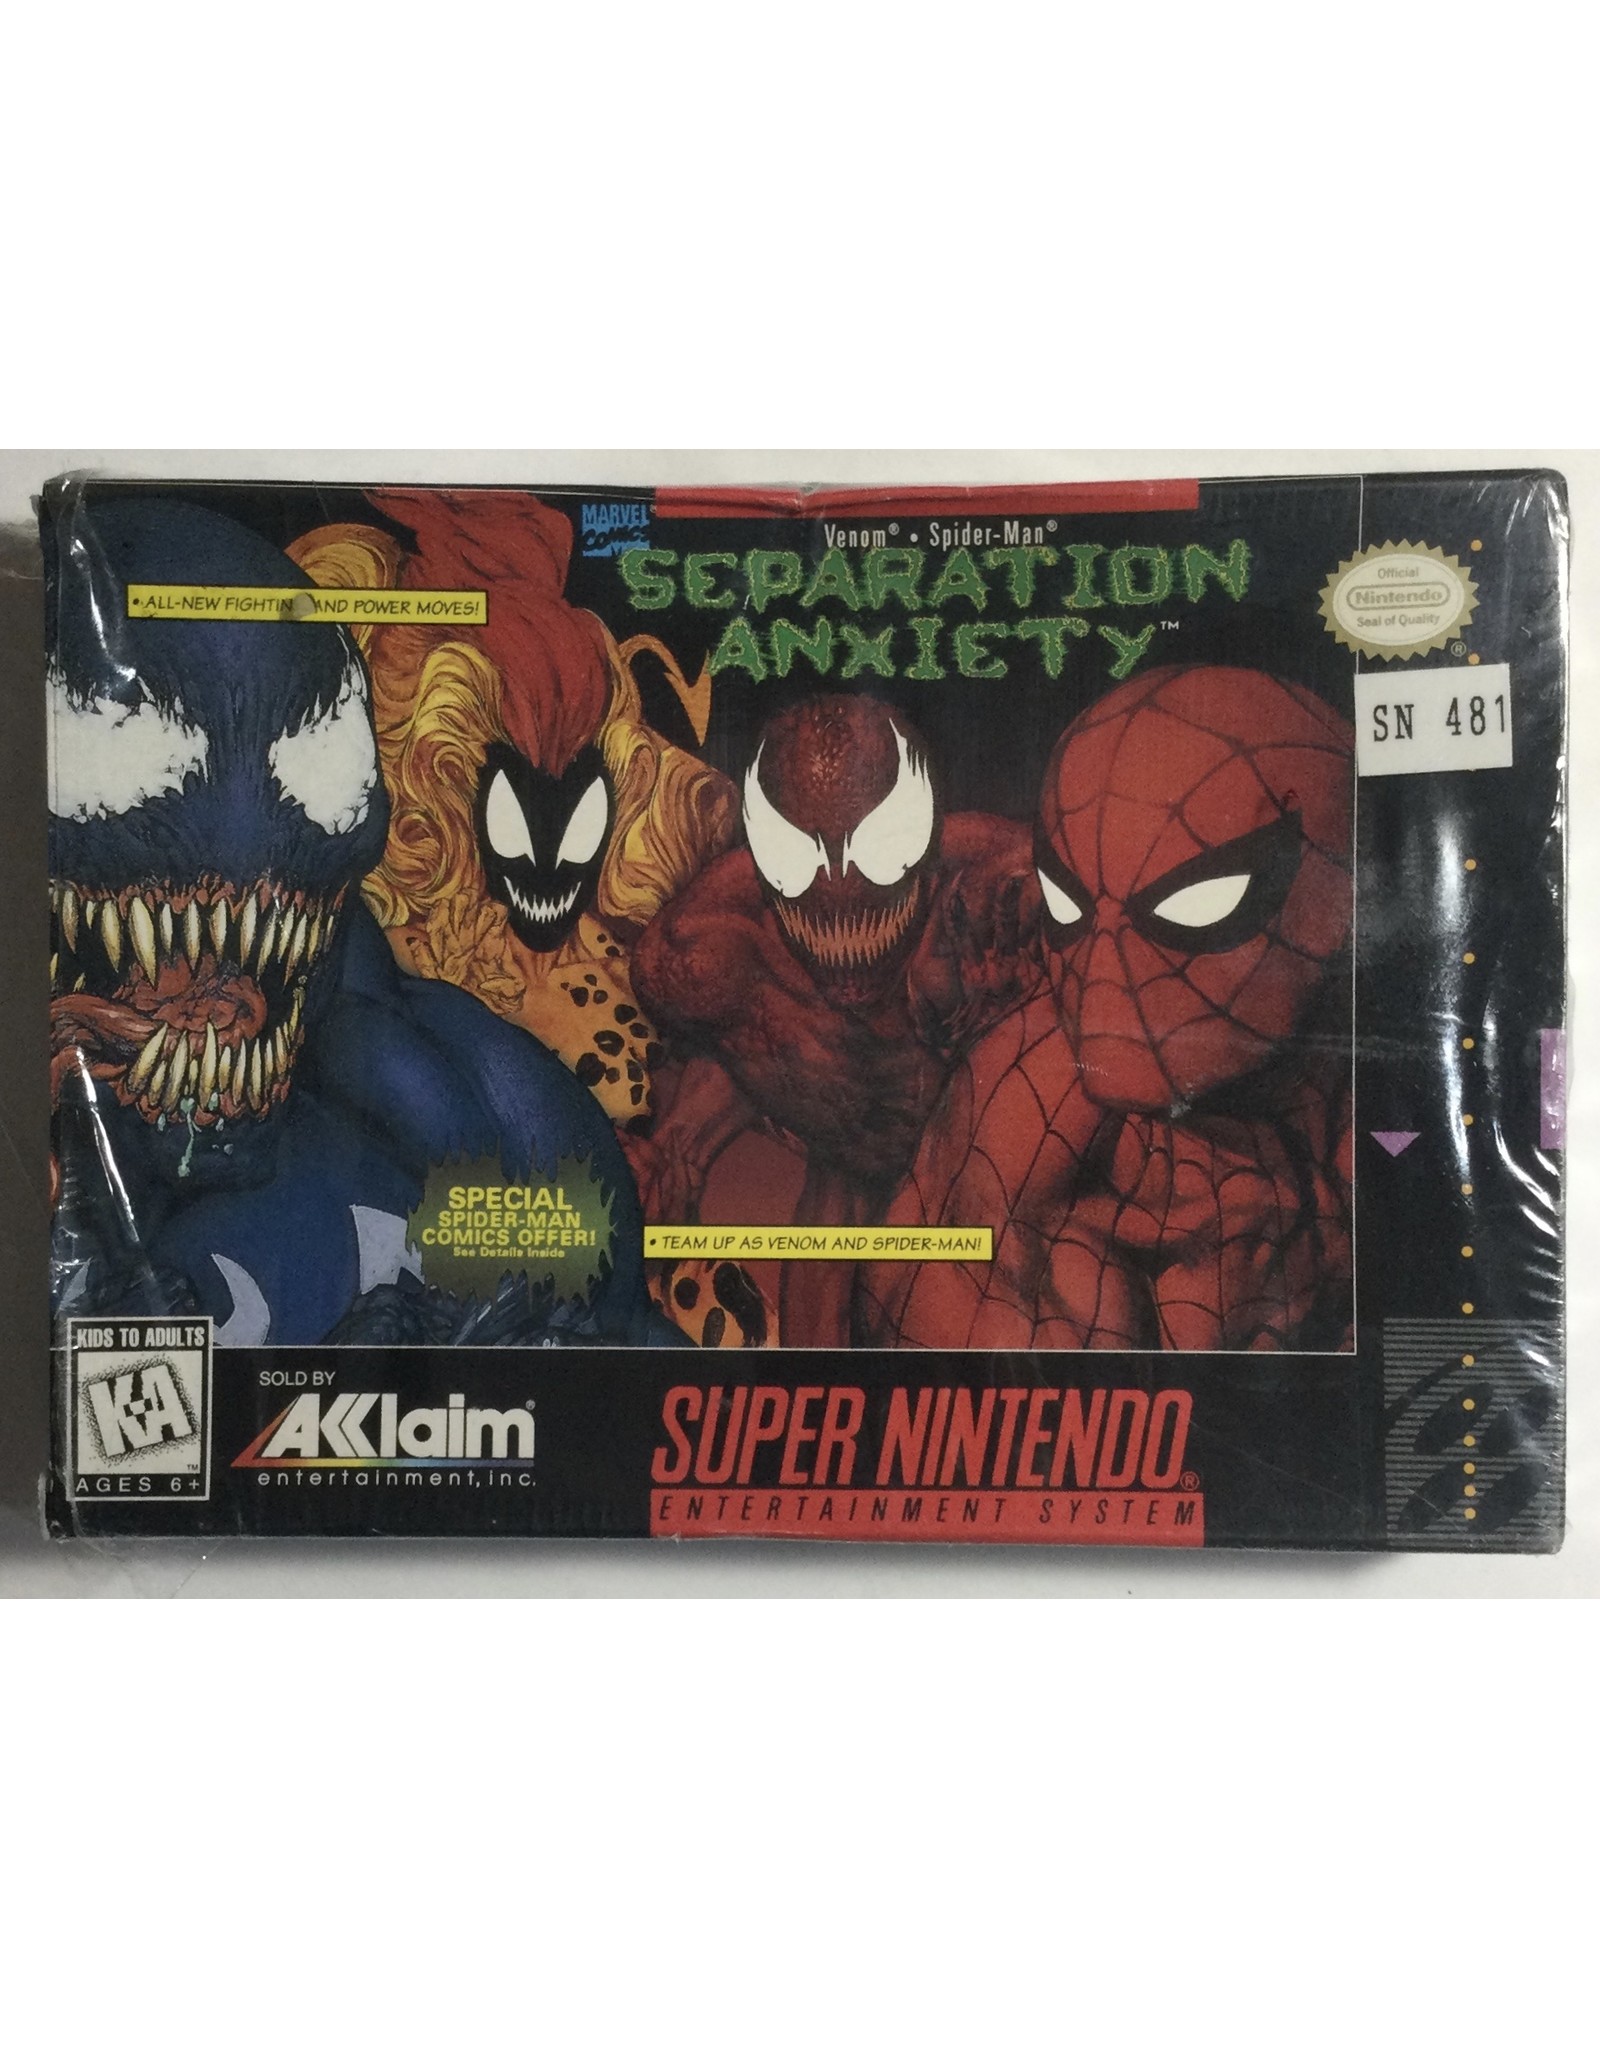 ACCLAIM Separation Anxiety for Super Nintendo Entertainment System (SNES) - CIB